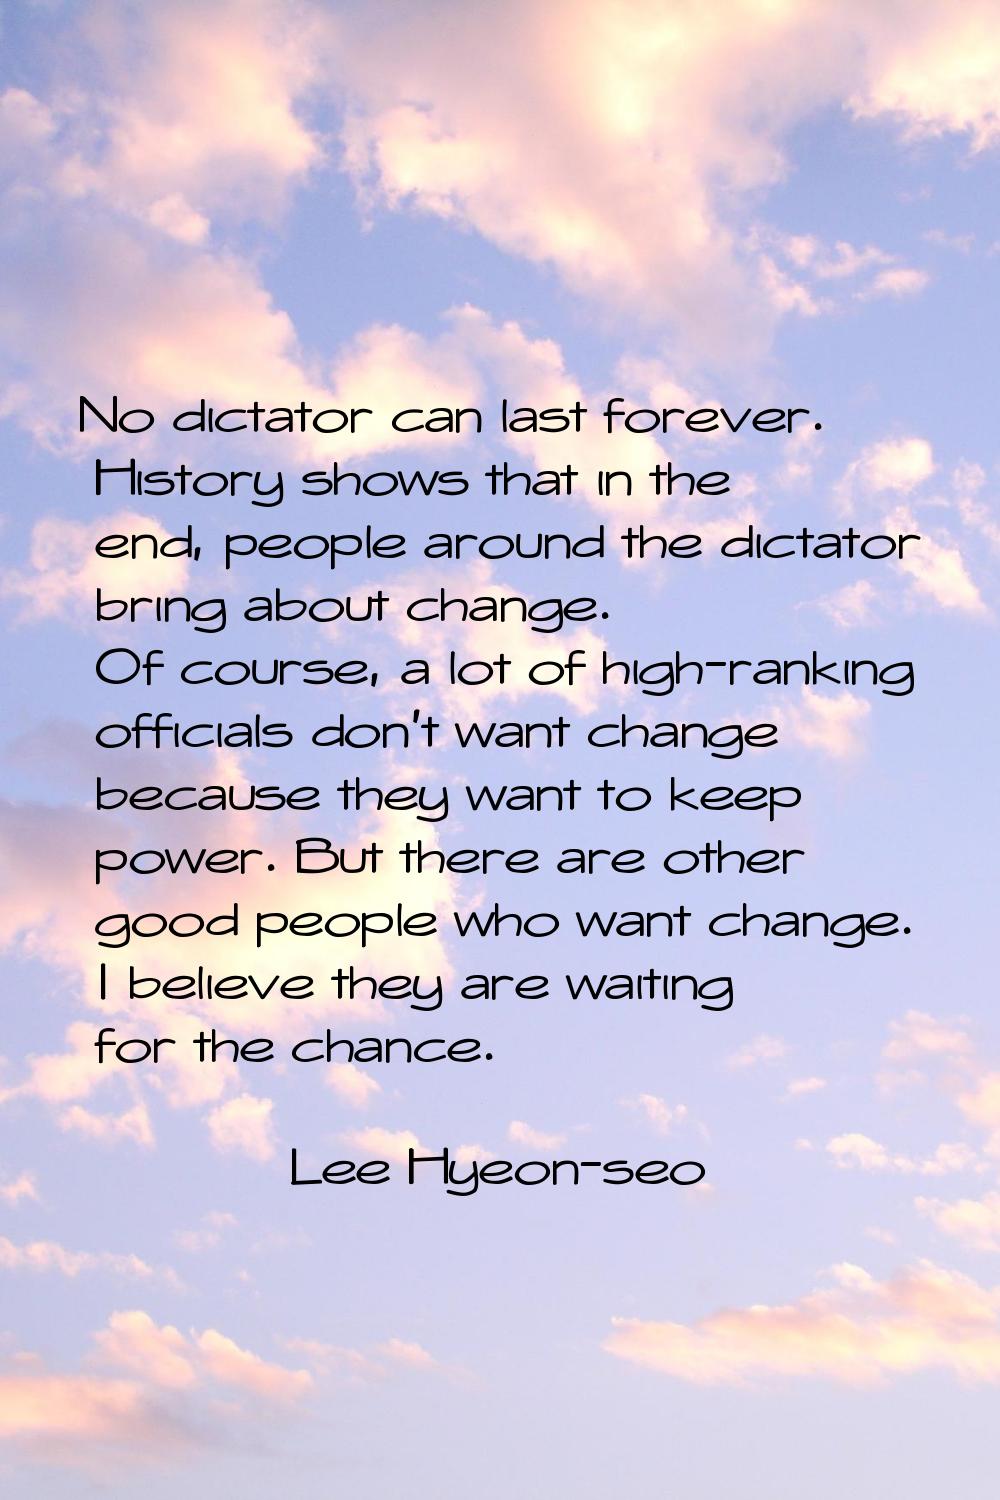 No dictator can last forever. History shows that in the end, people around the dictator bring about